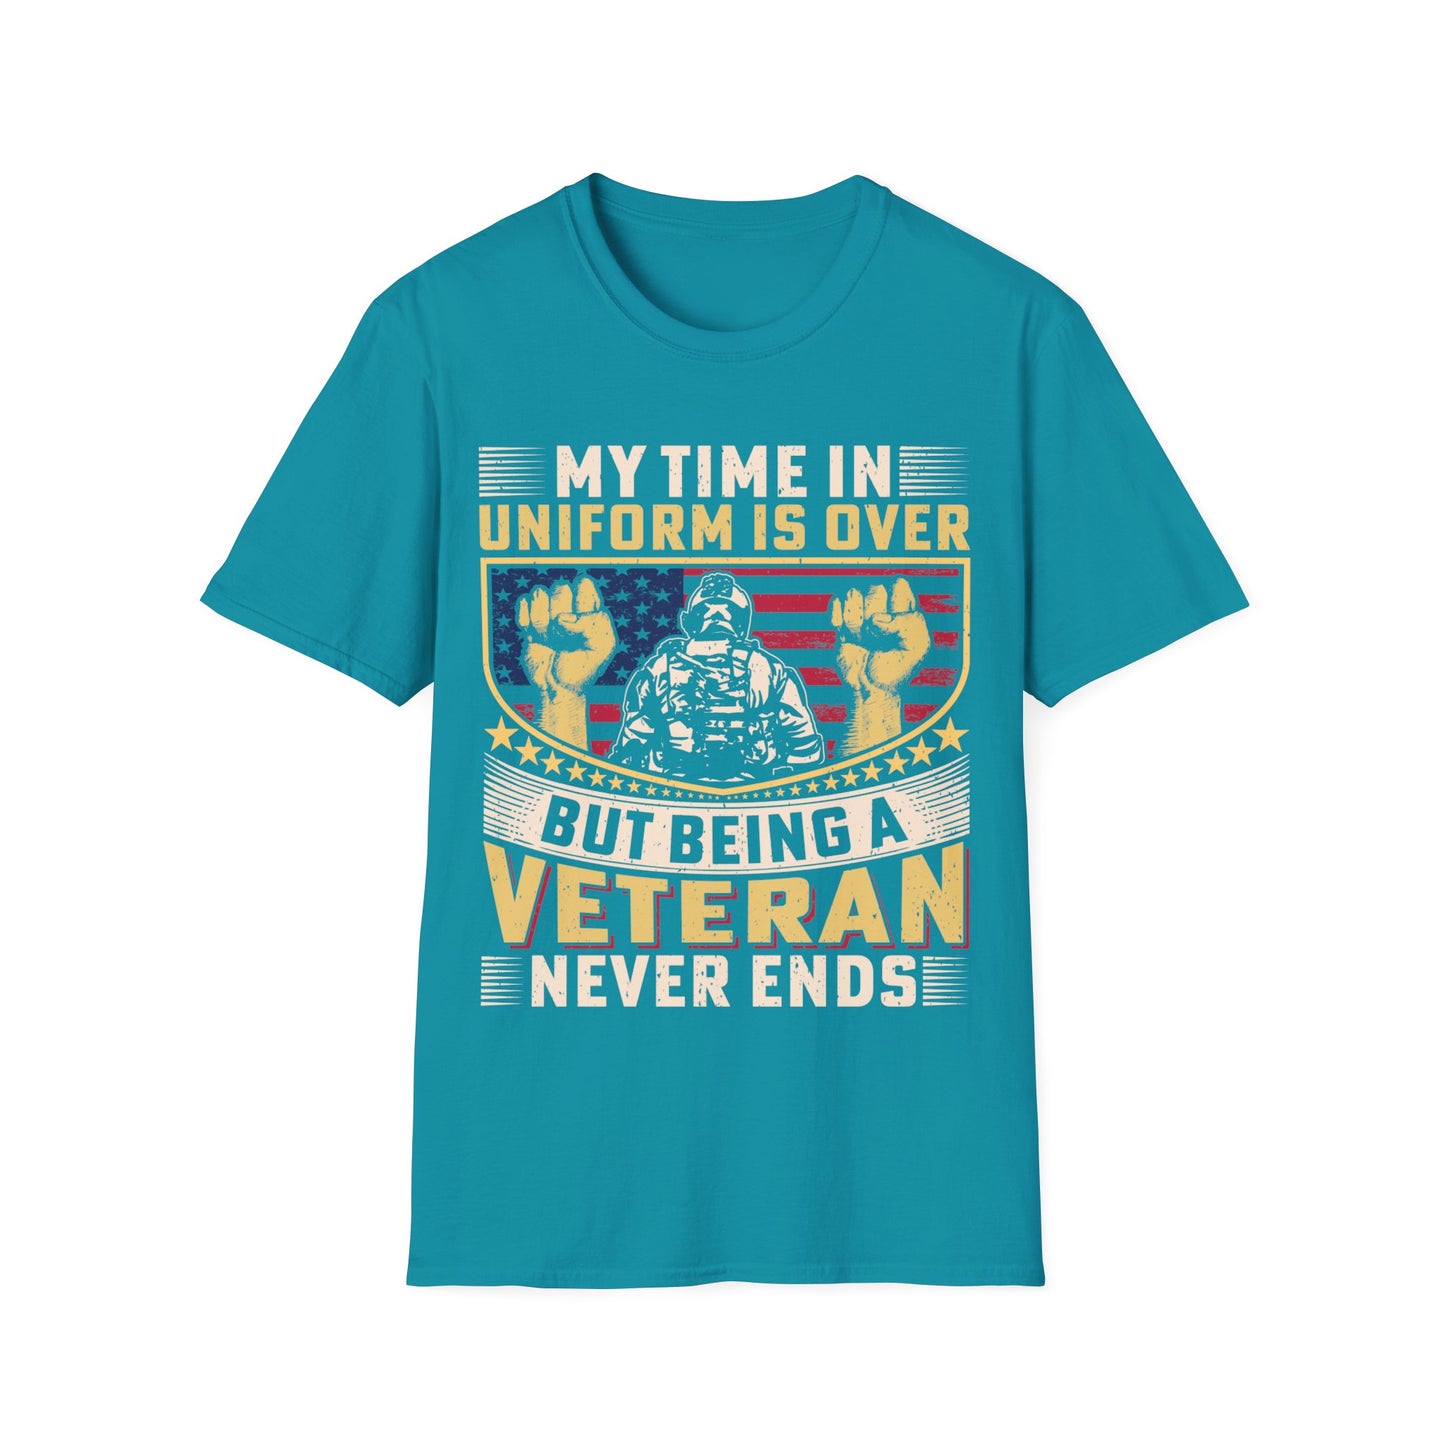 Being A Veteran Never Ends - Unisex Softstyle T-Shirt